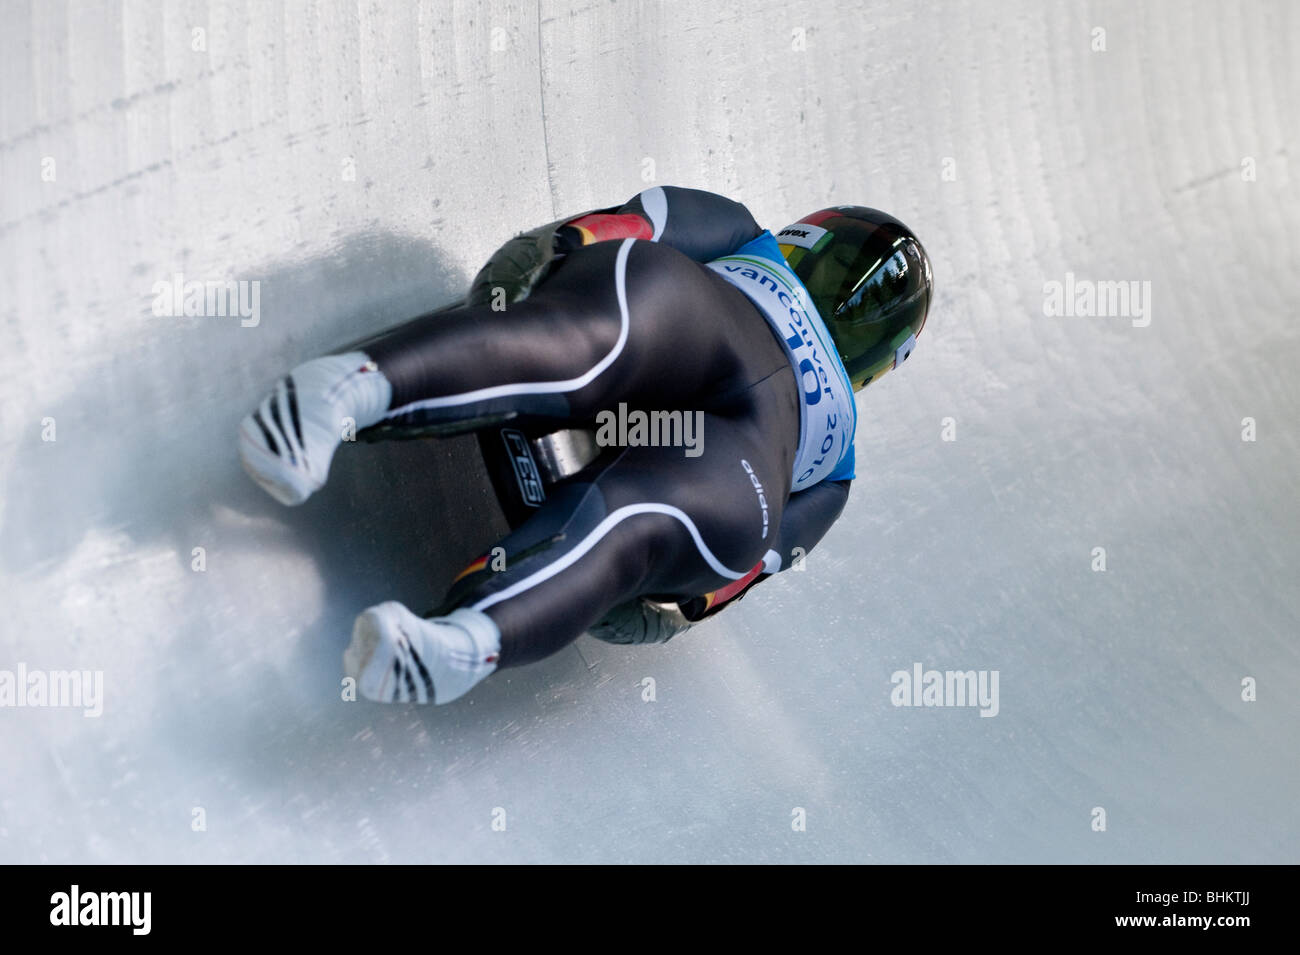 Anke Wischnewski (GER) during a training run of the Women's Luge at the Whistler Sliding Center Stock Photo